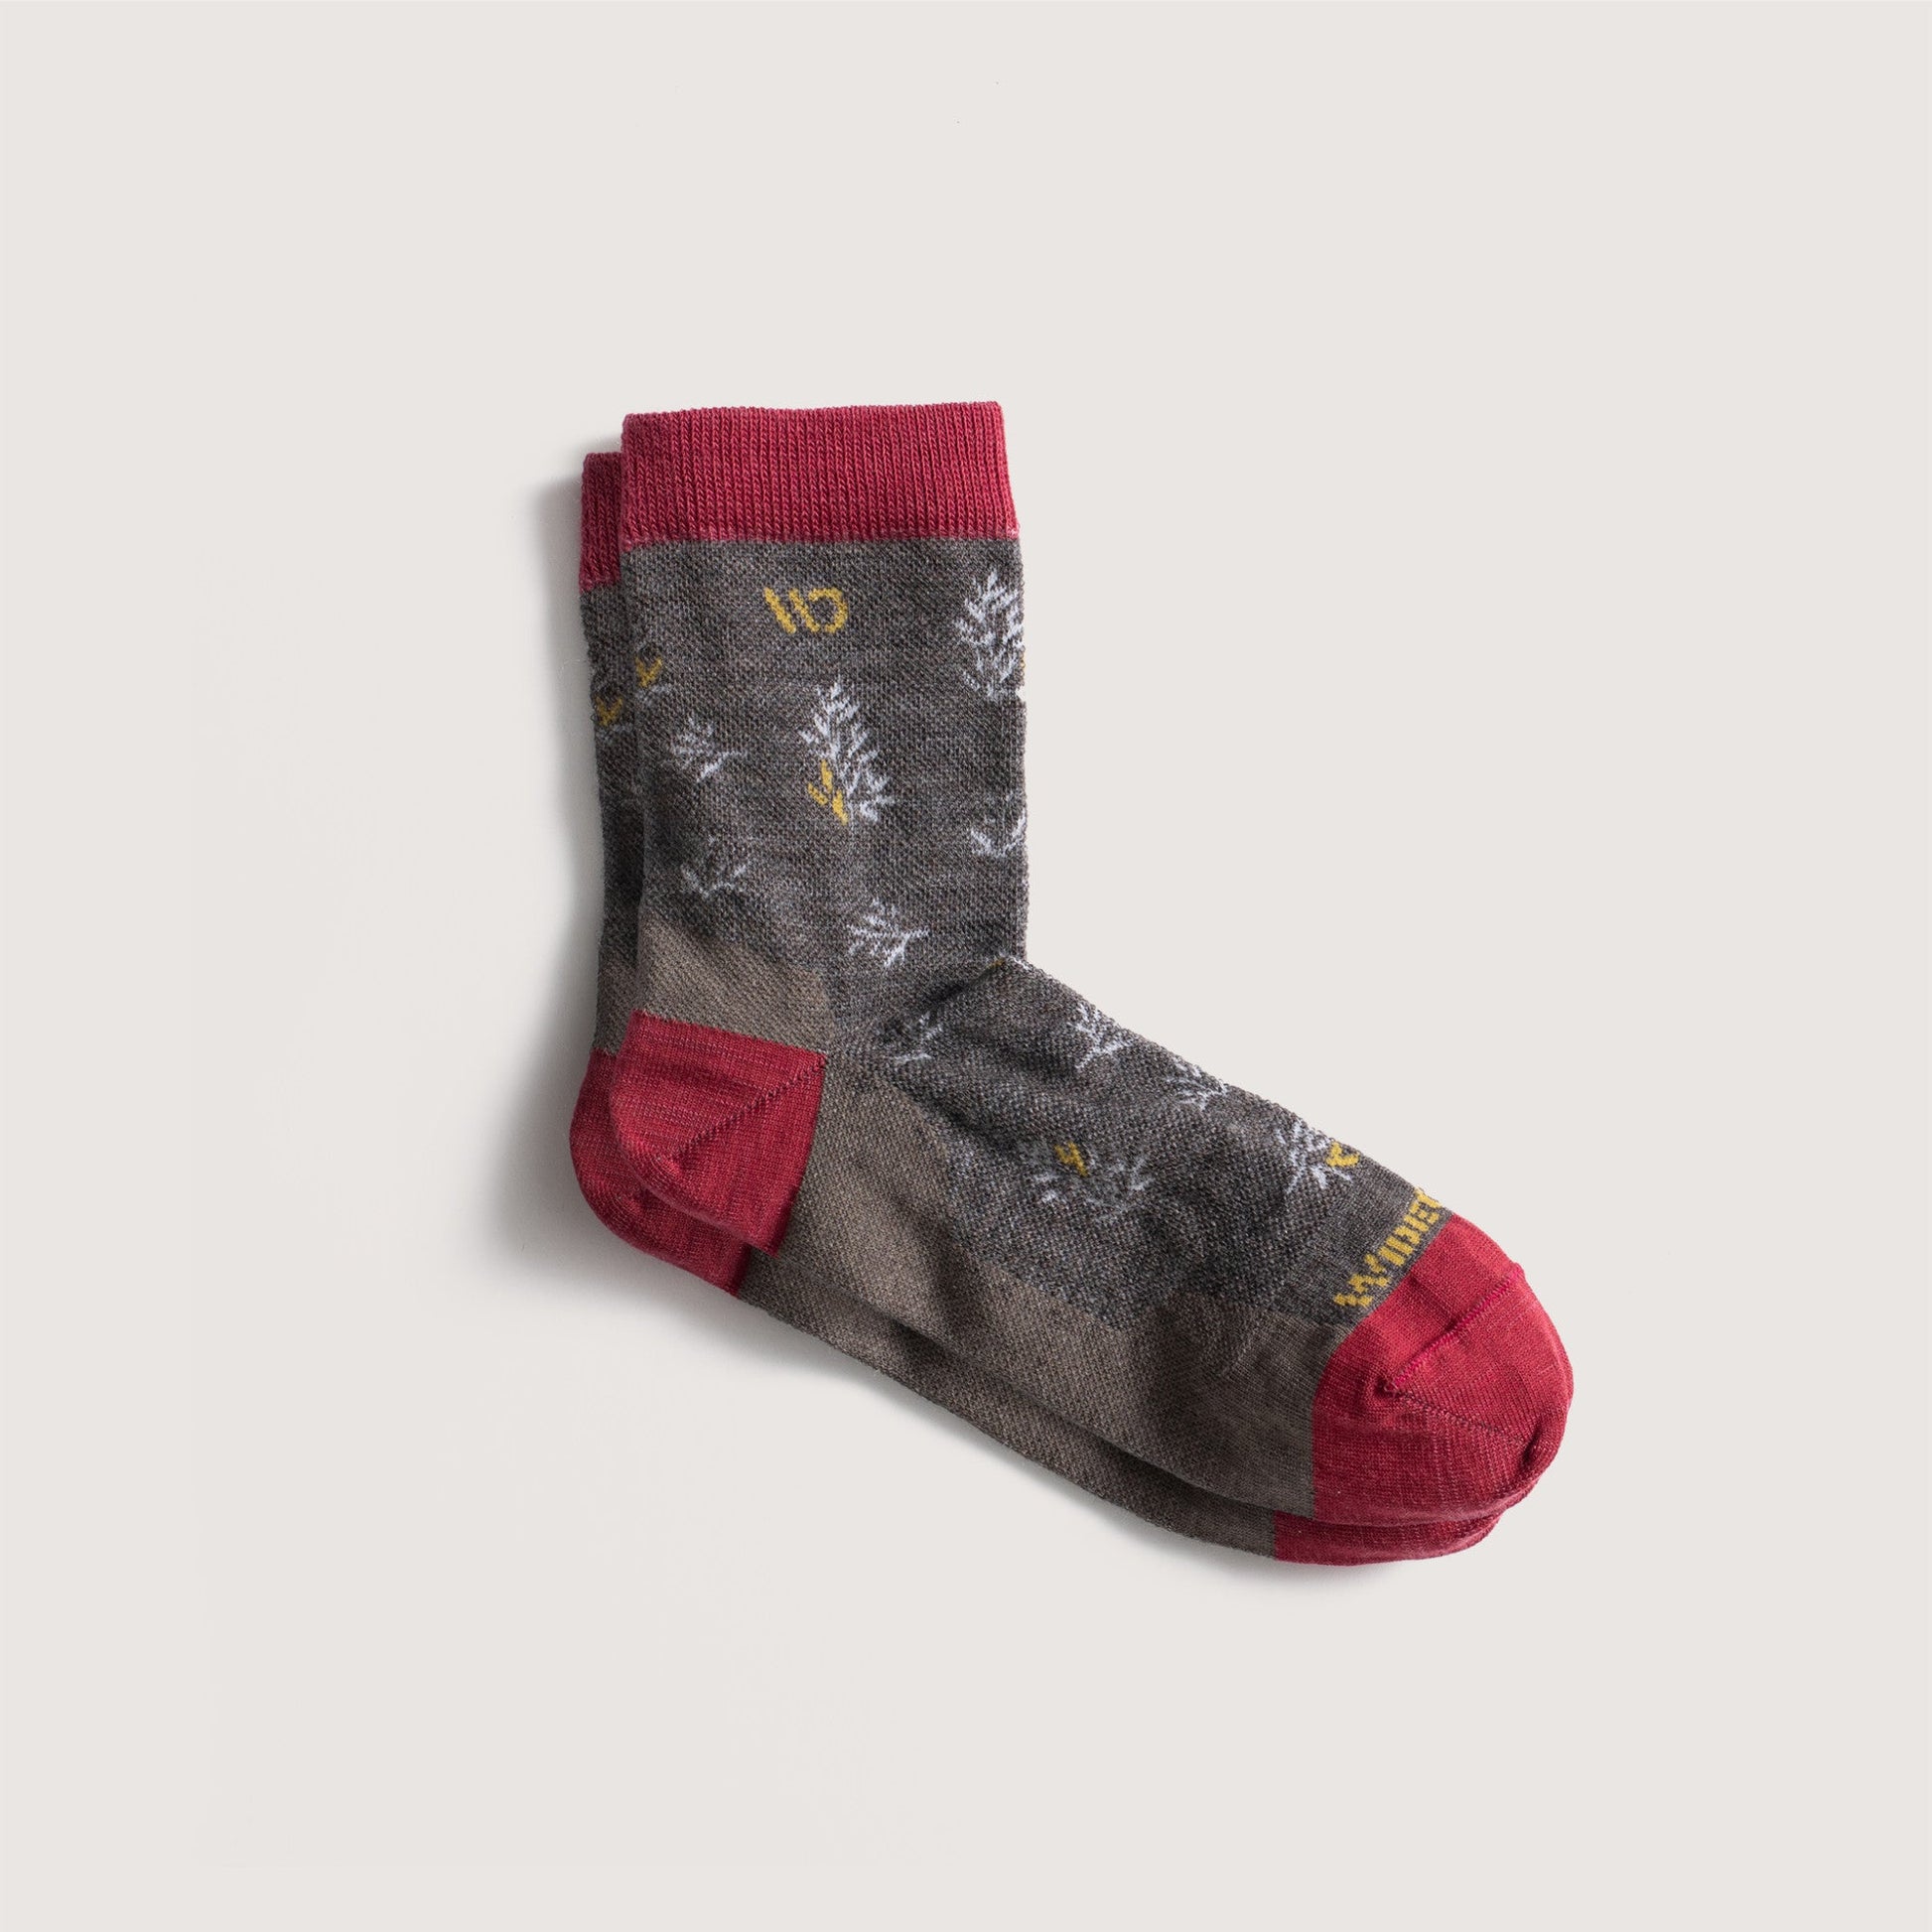 Flat socks featuring  maroon heel/toe/cuff, taupe body, yellow logo and white design --Light Gray/Teal/Denim/Taupe